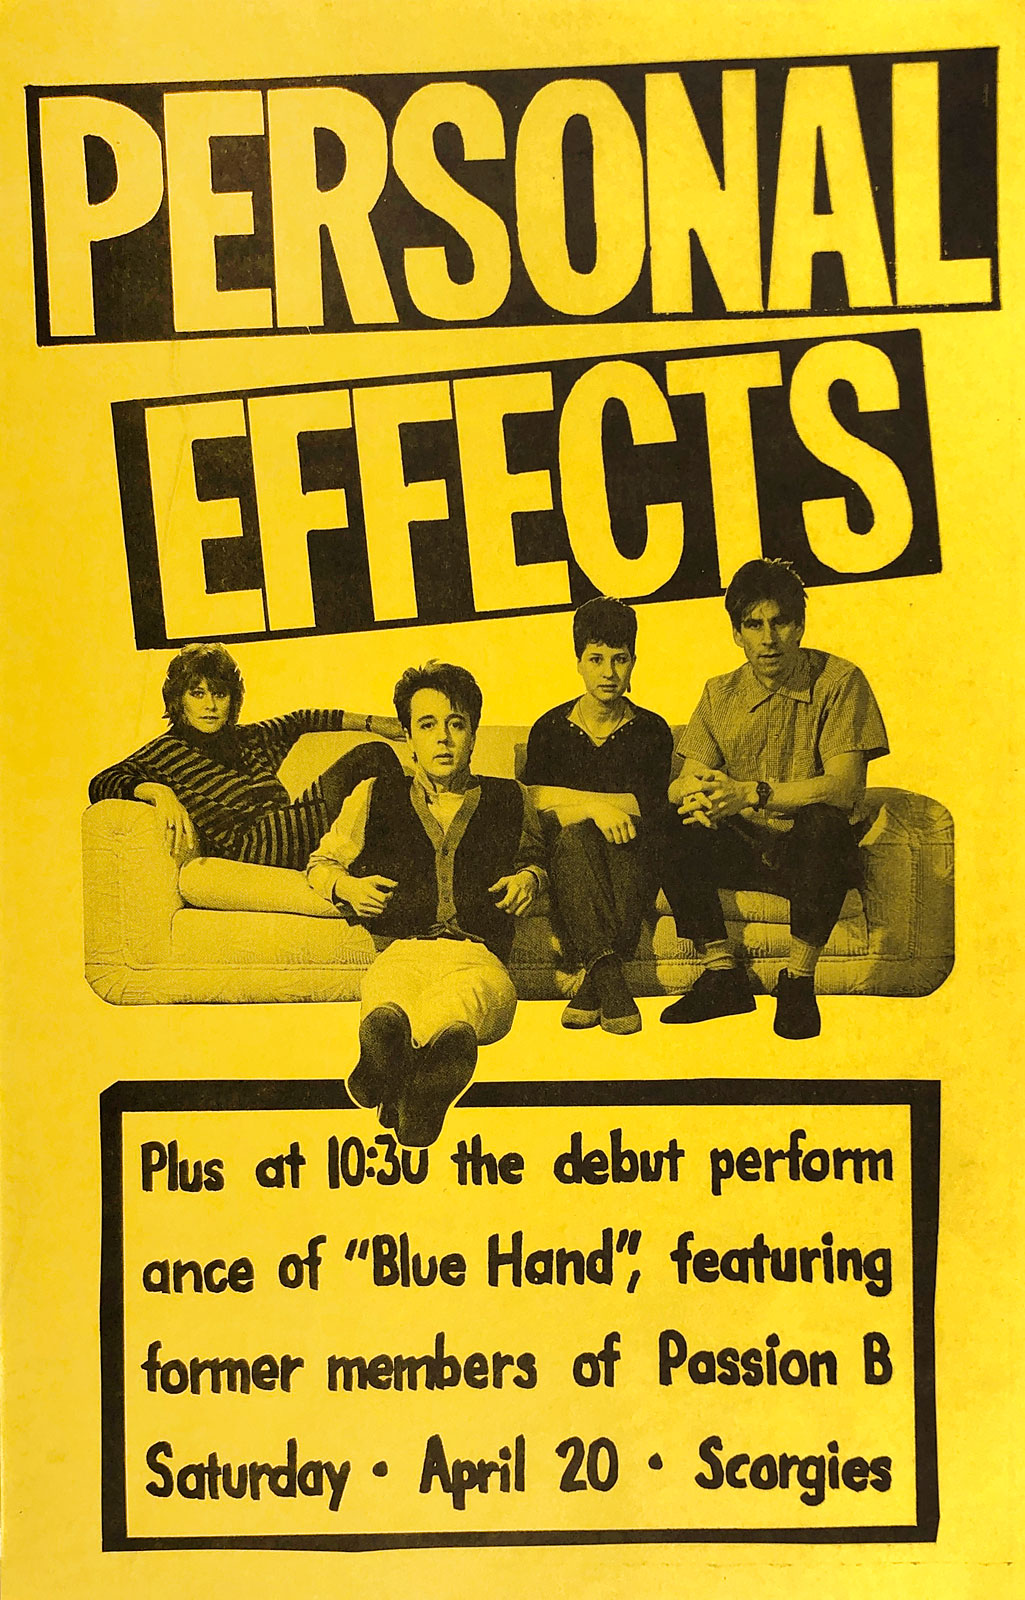 Poster for Personal Effects with Blue Hand at Jazzberry's in Rochester, New York on 04.20.1985. This was the debut performance of Blue Hand featuring Brian Horton and former members of Passion B.